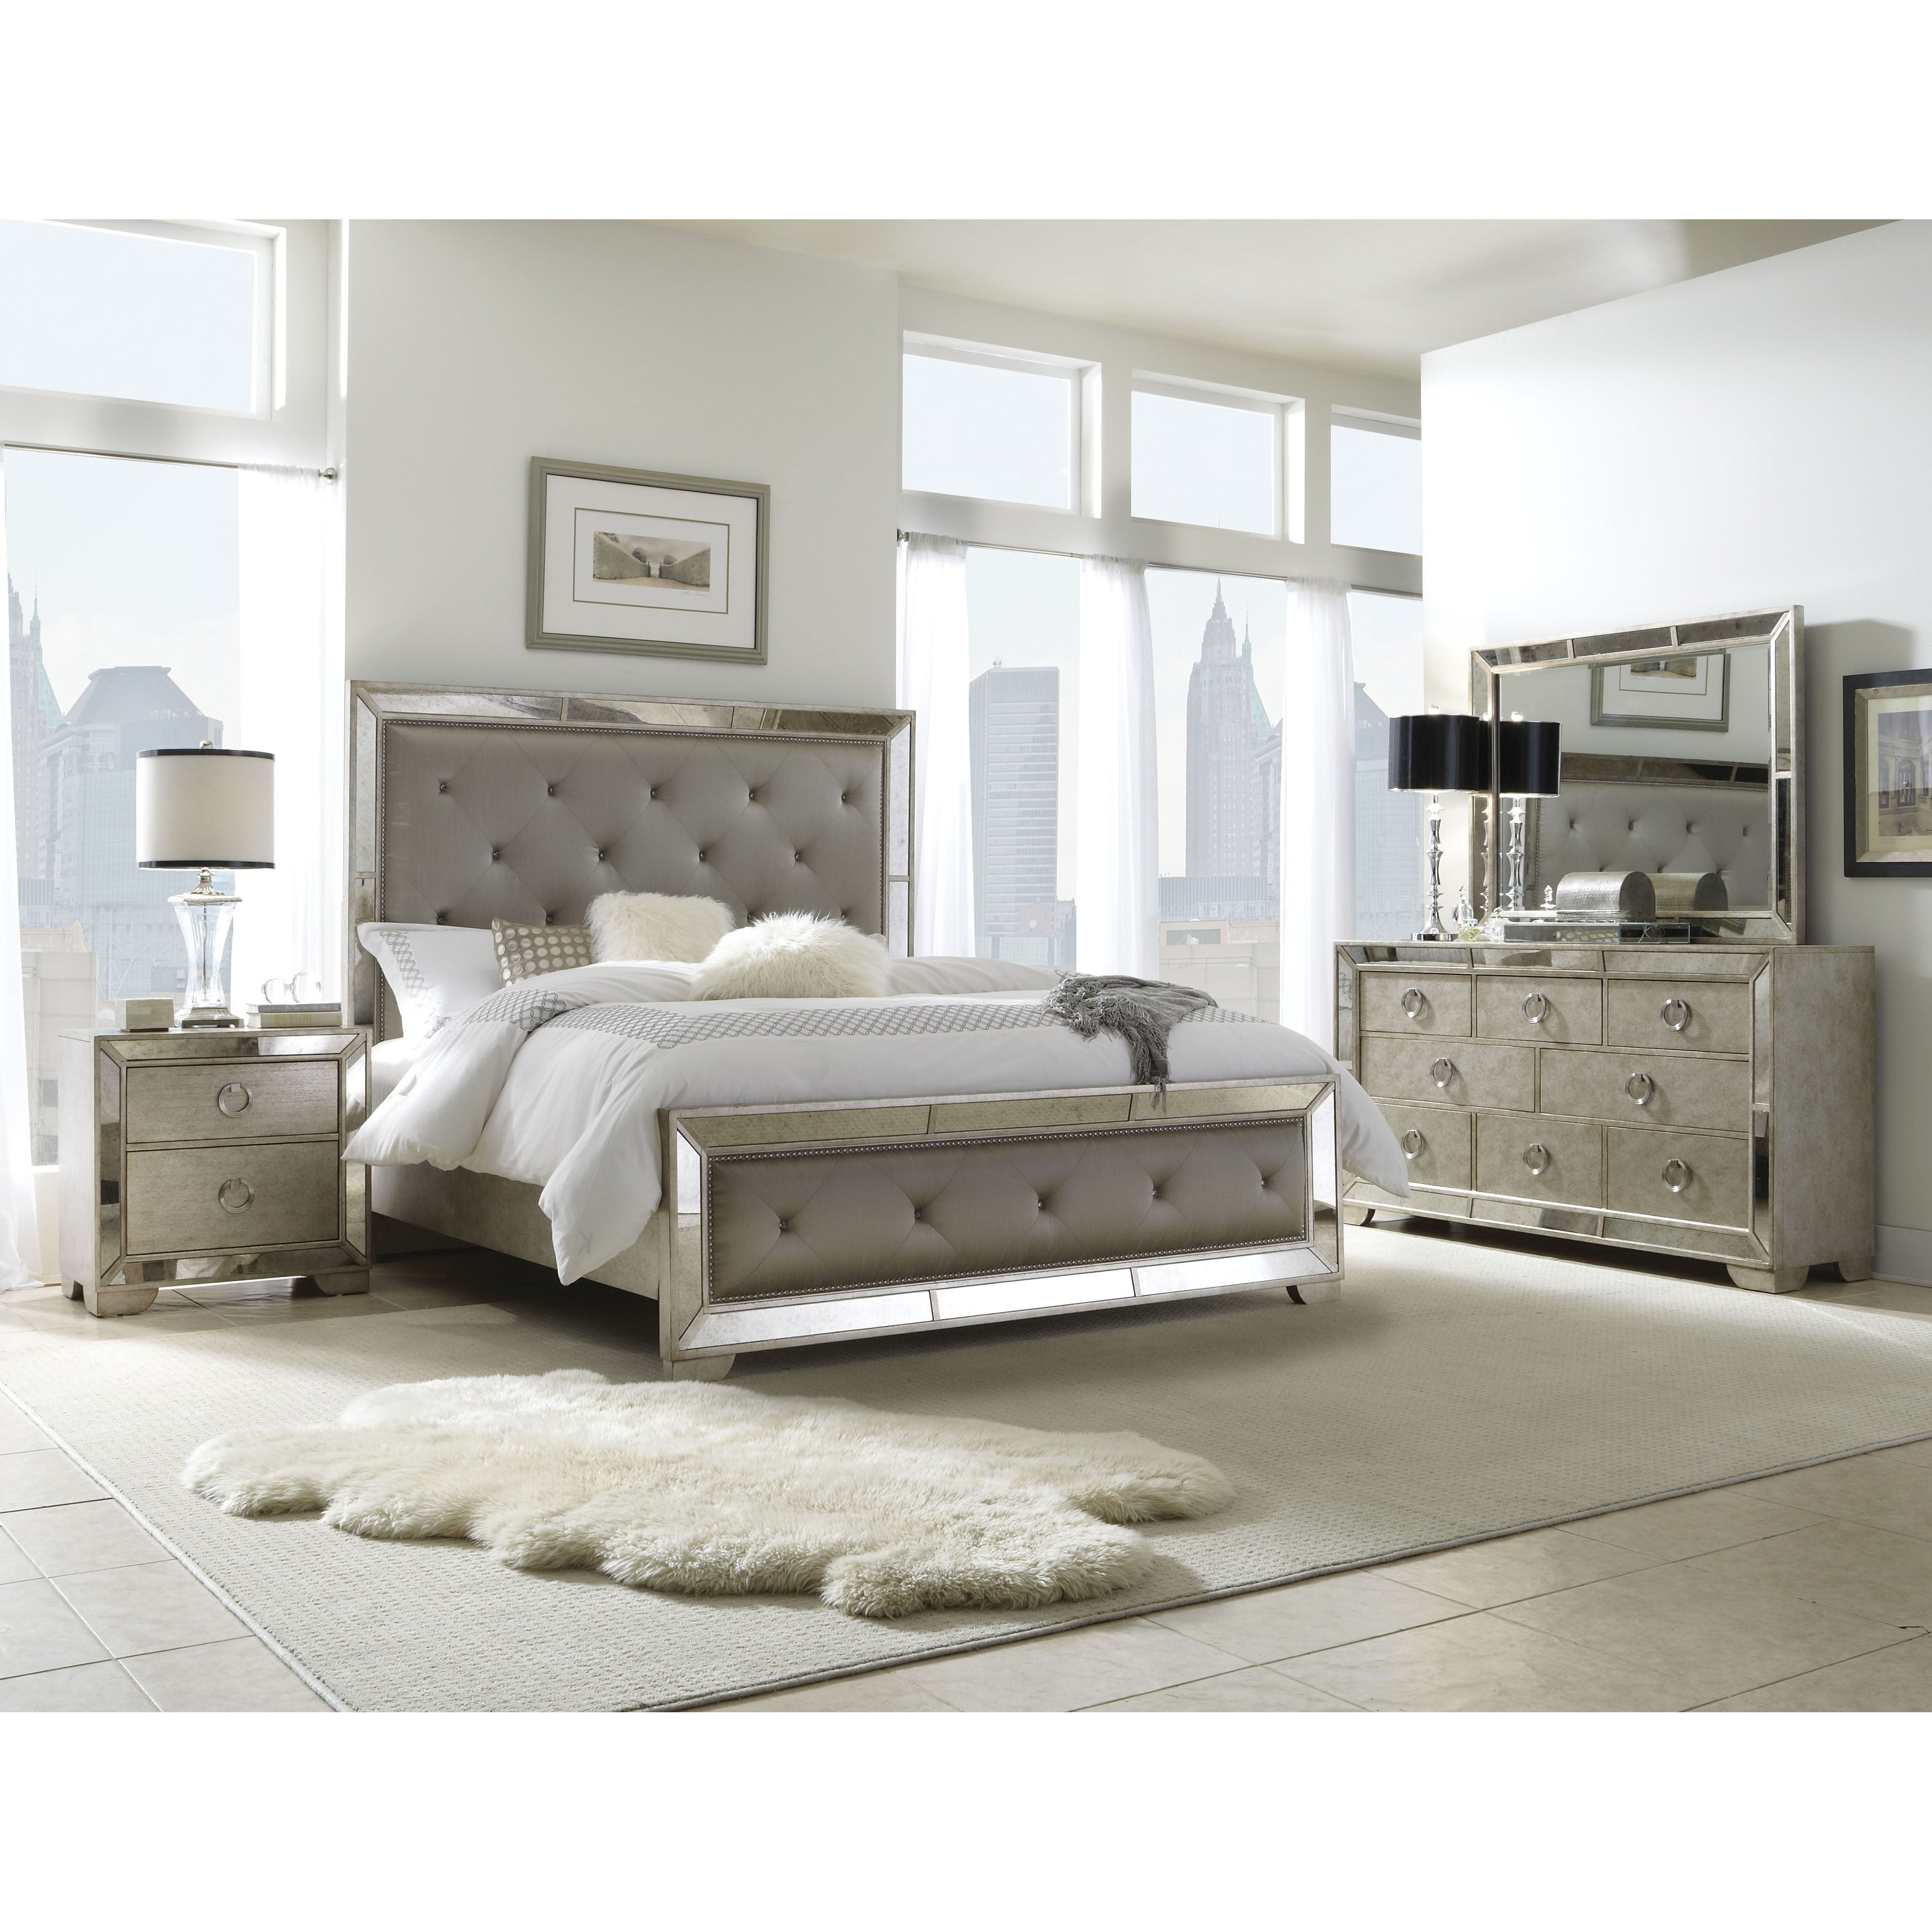 Celine 6 Piece Mirrored And Upholstered Tufted Queen Size Bedroom Set inside dimensions 3500 X 3500